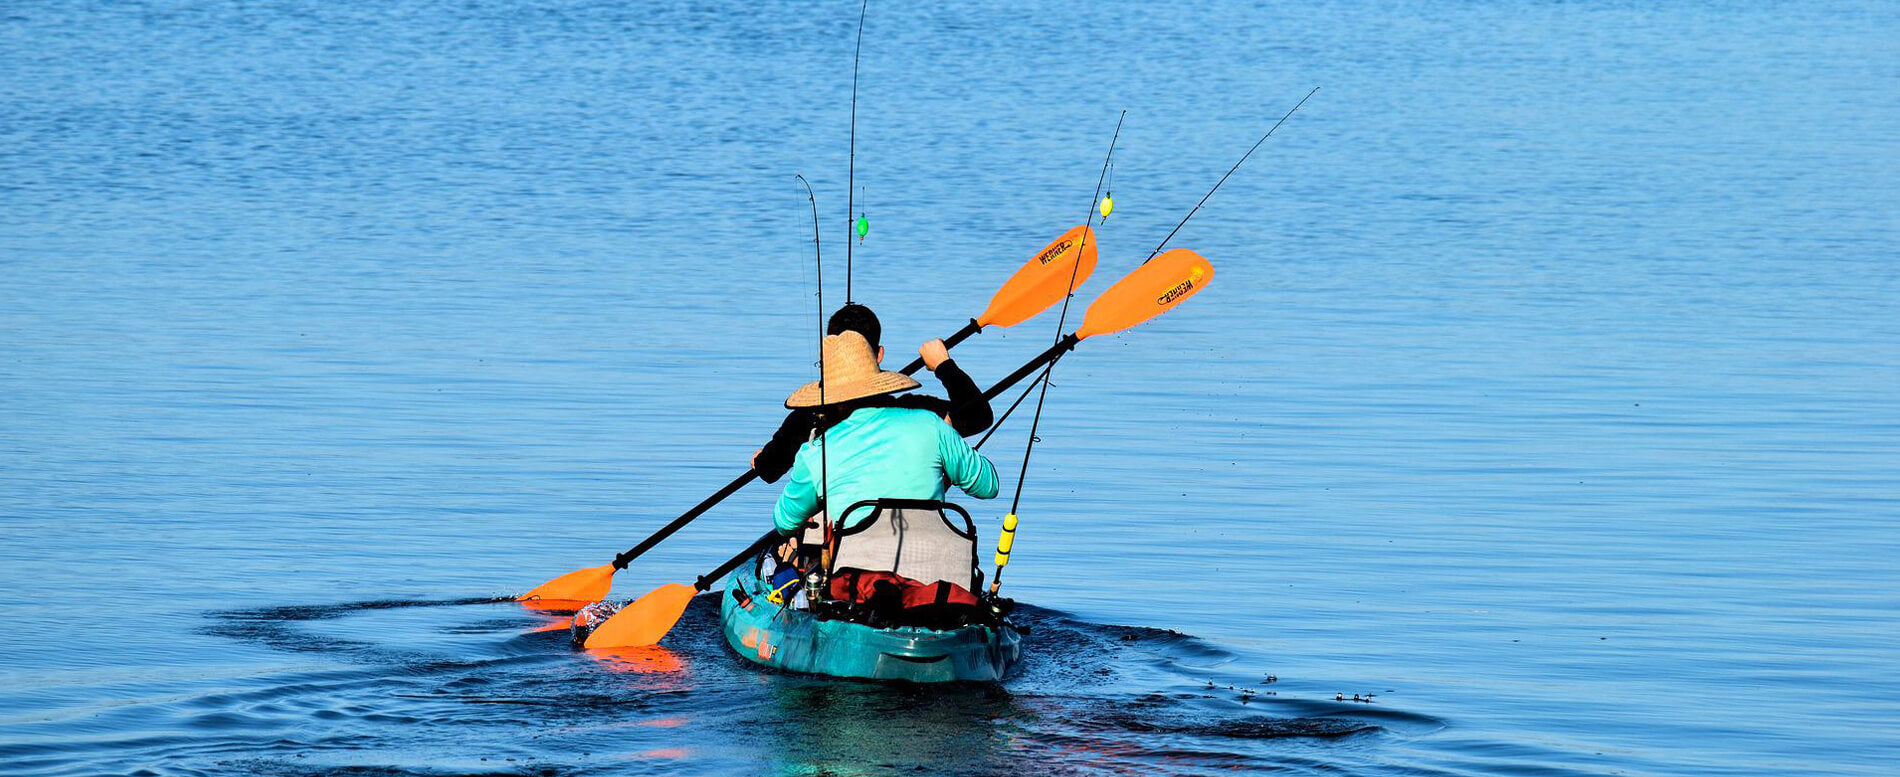 Best Tandem Fishing Kayaks To Share The Fun – Buyer's Guide - Gili Sports UK